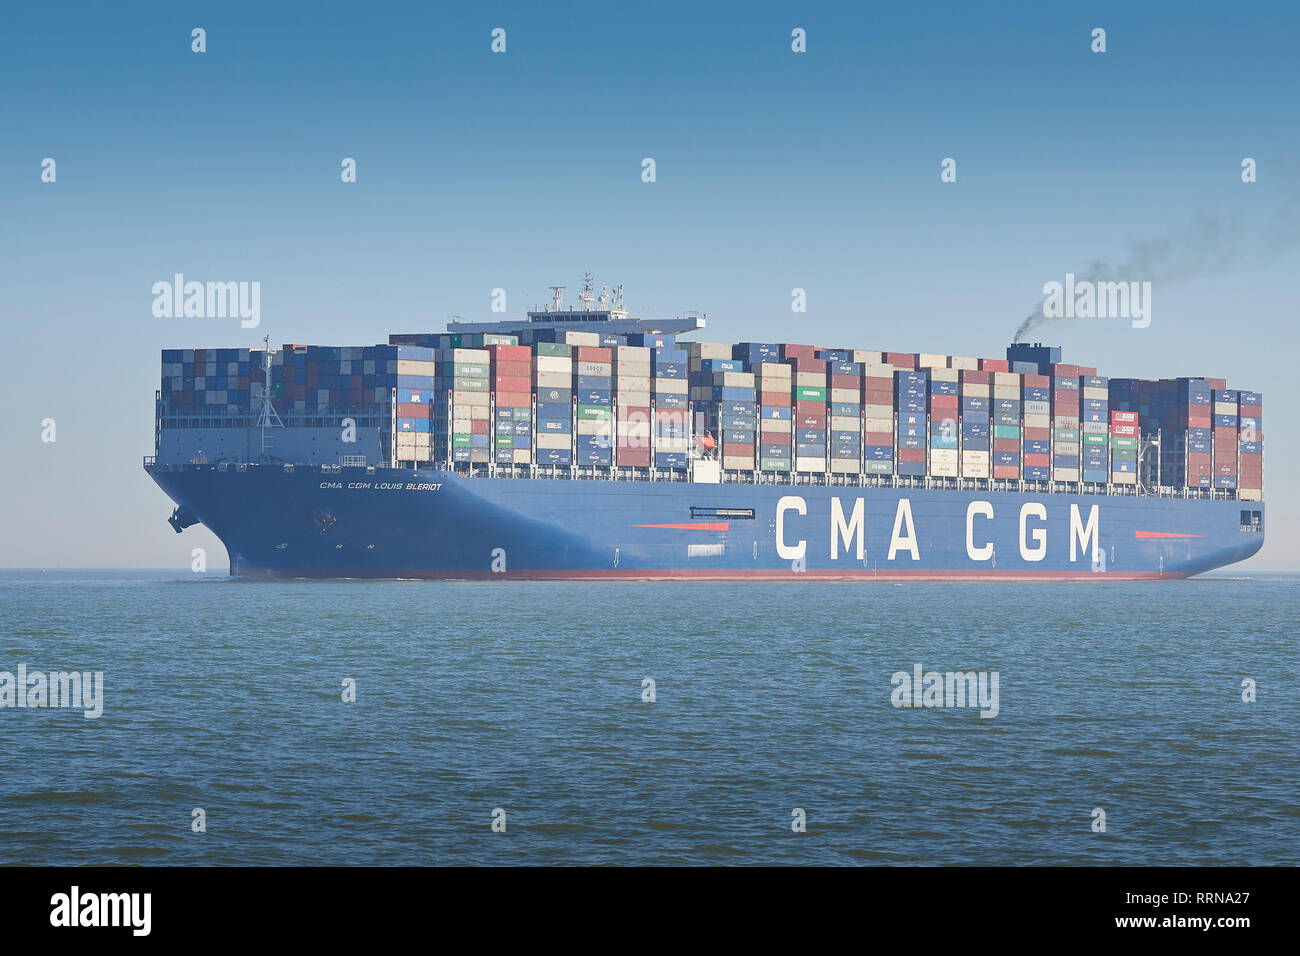 The Giant, CMA CGM LOUIS BLERIOT, 400 Metre, Ultra-Large, Container Ship, At Sea, Approaching Southampton, Hampshire, UK. Stock Photo